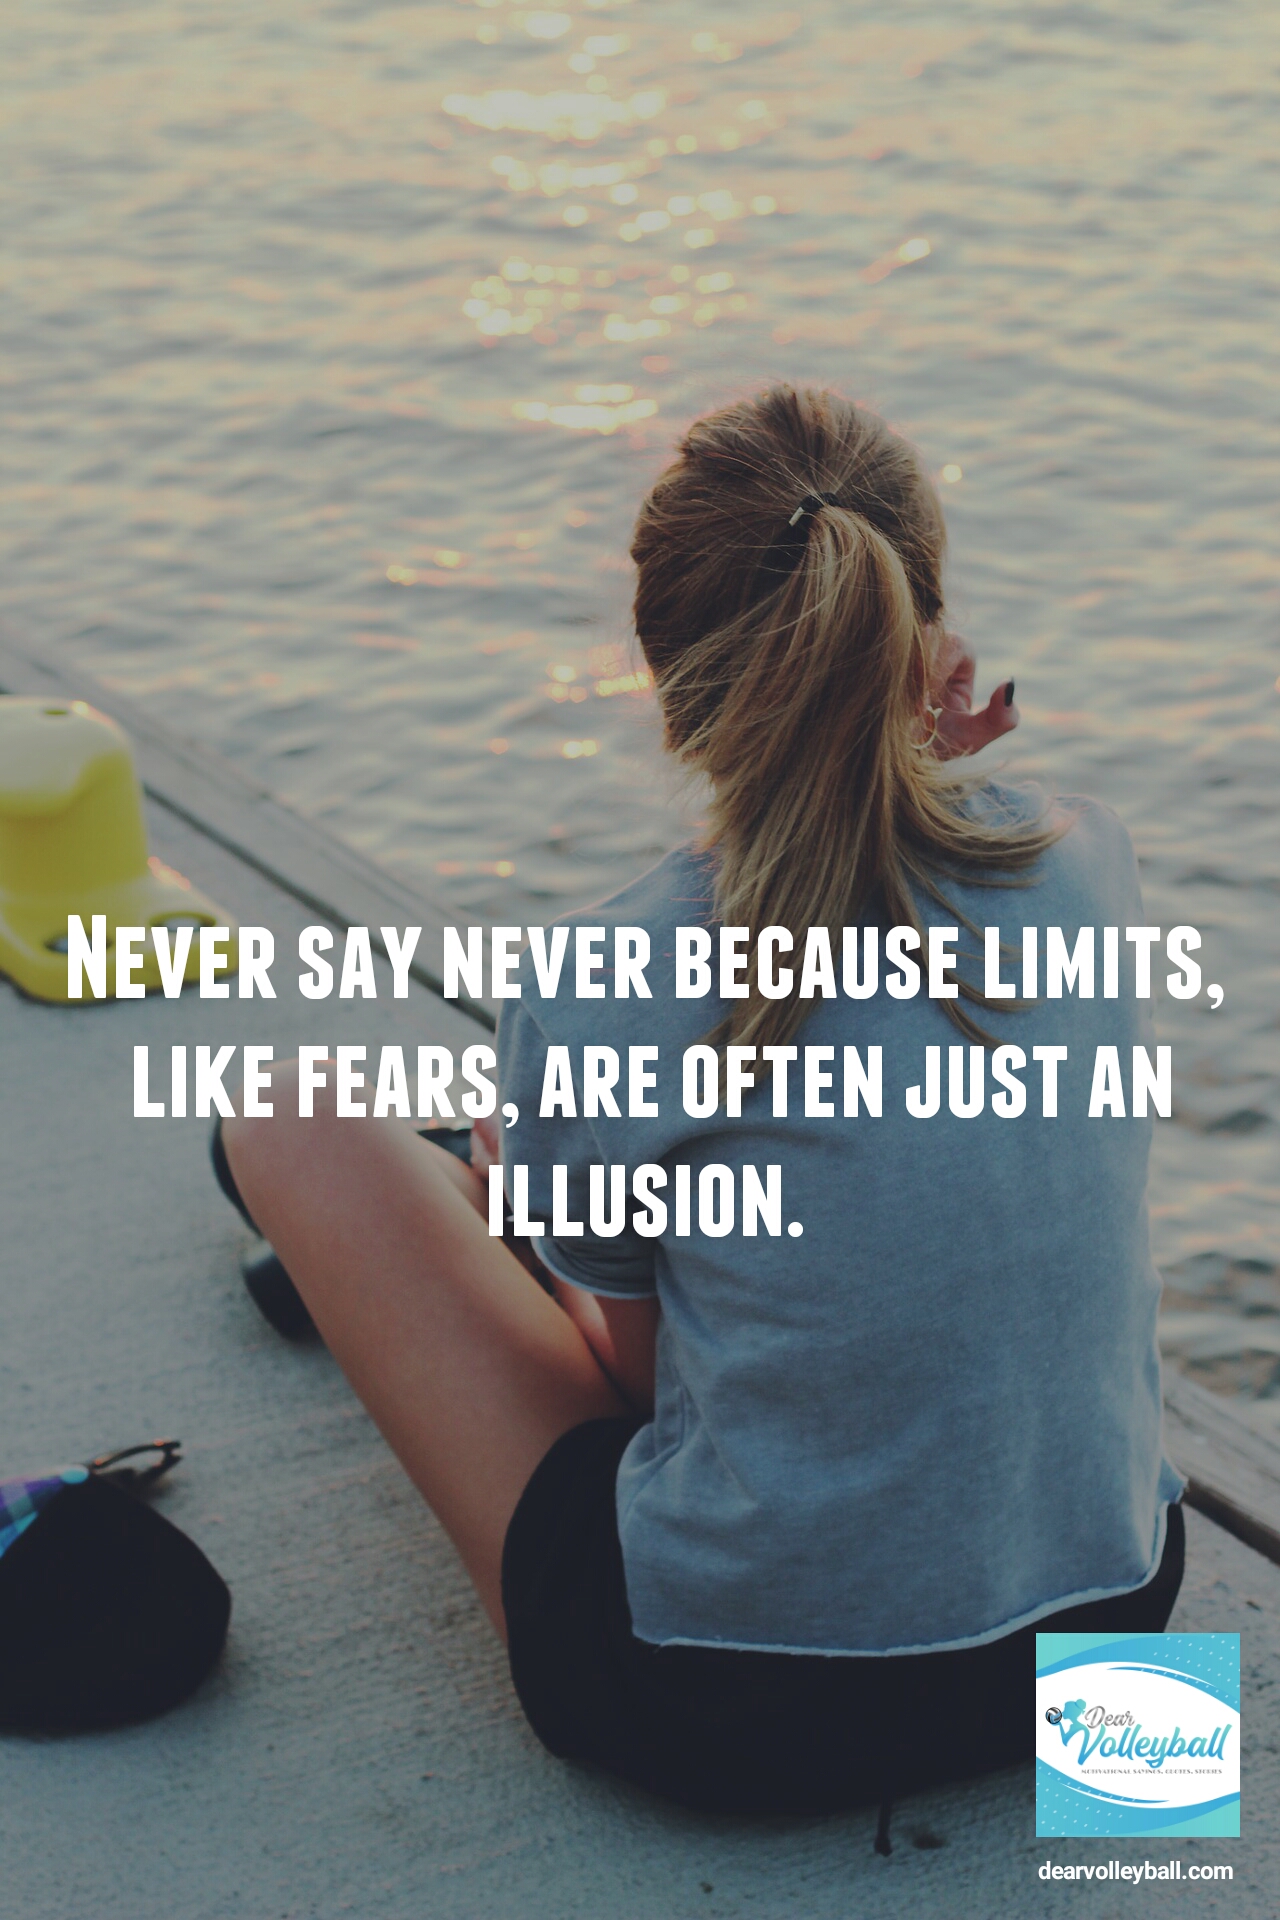 Never say never because limits like fears are often just an illusion and 75 other volleyball inspirational quotes on Dear Volleyball.com